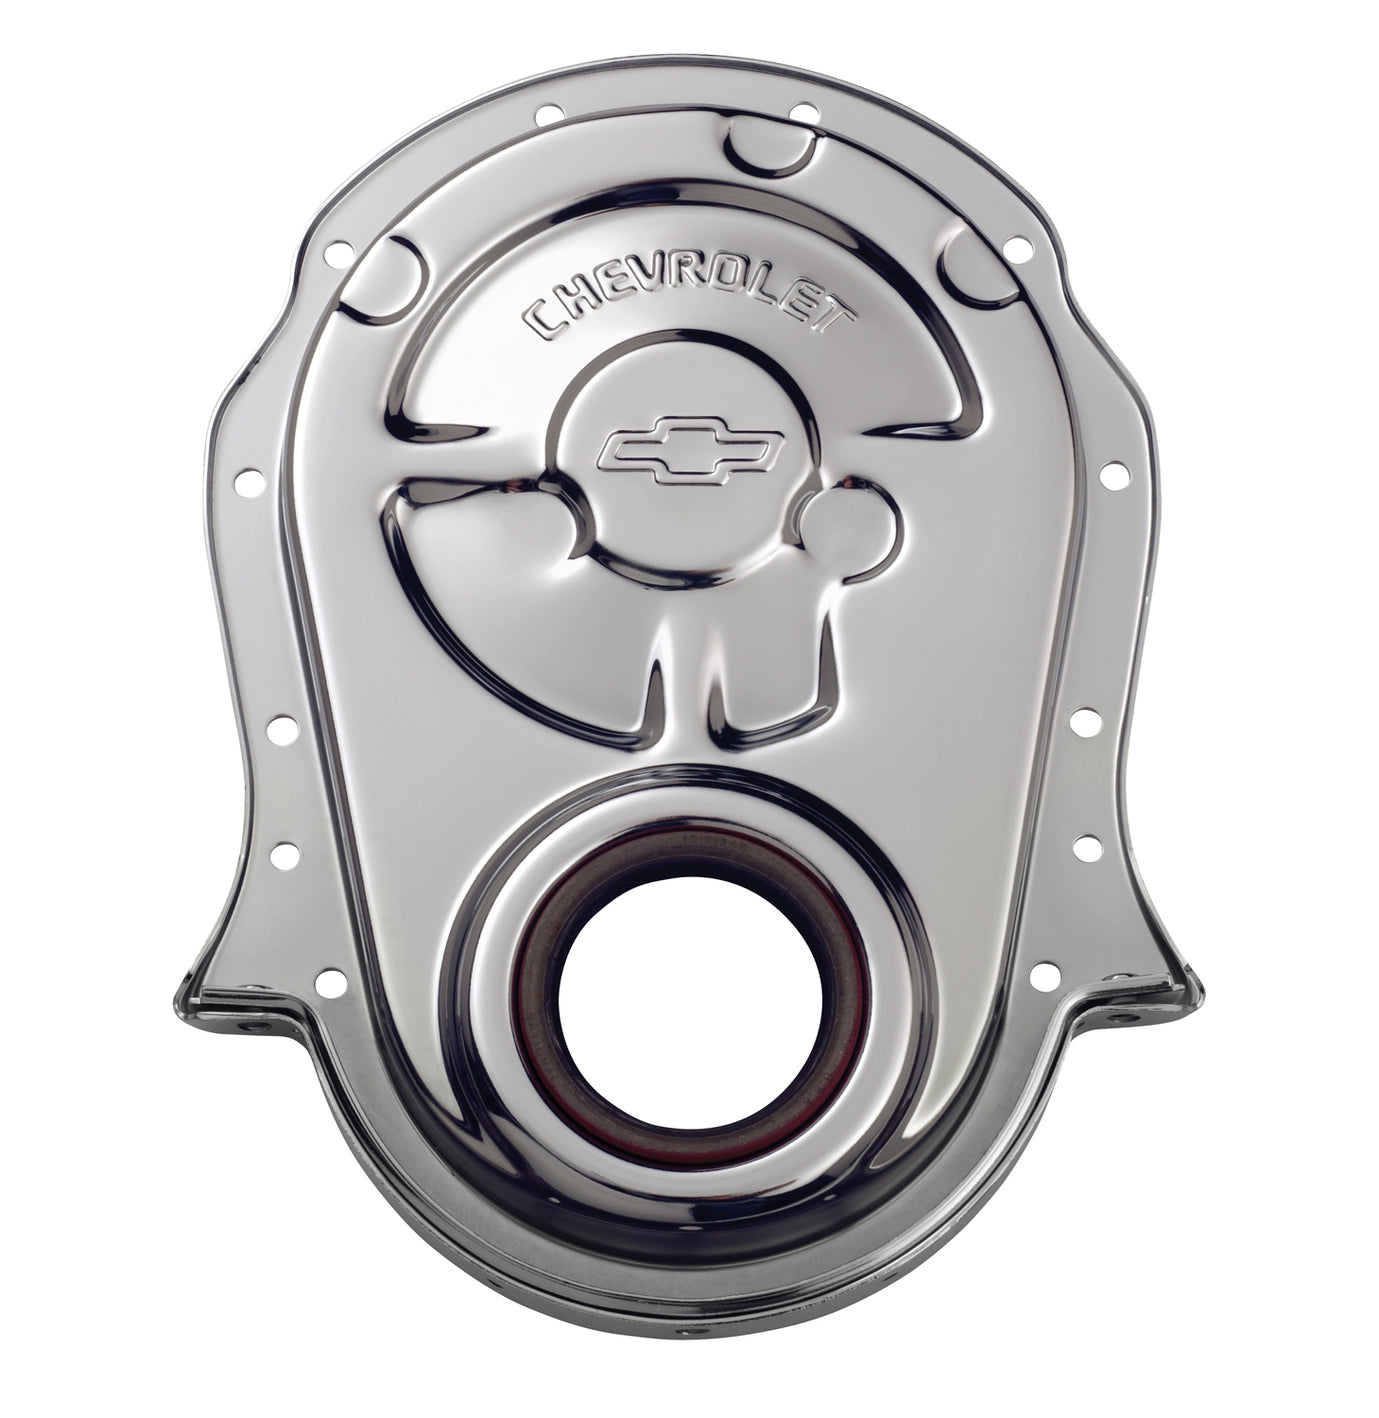 Chevrolet Performance Parts - 141-216 - Engine Timing Cover - Engine Timing Chain Cover Chrome Steel w/ Chevy and Bowtie Logo For BB Chevy